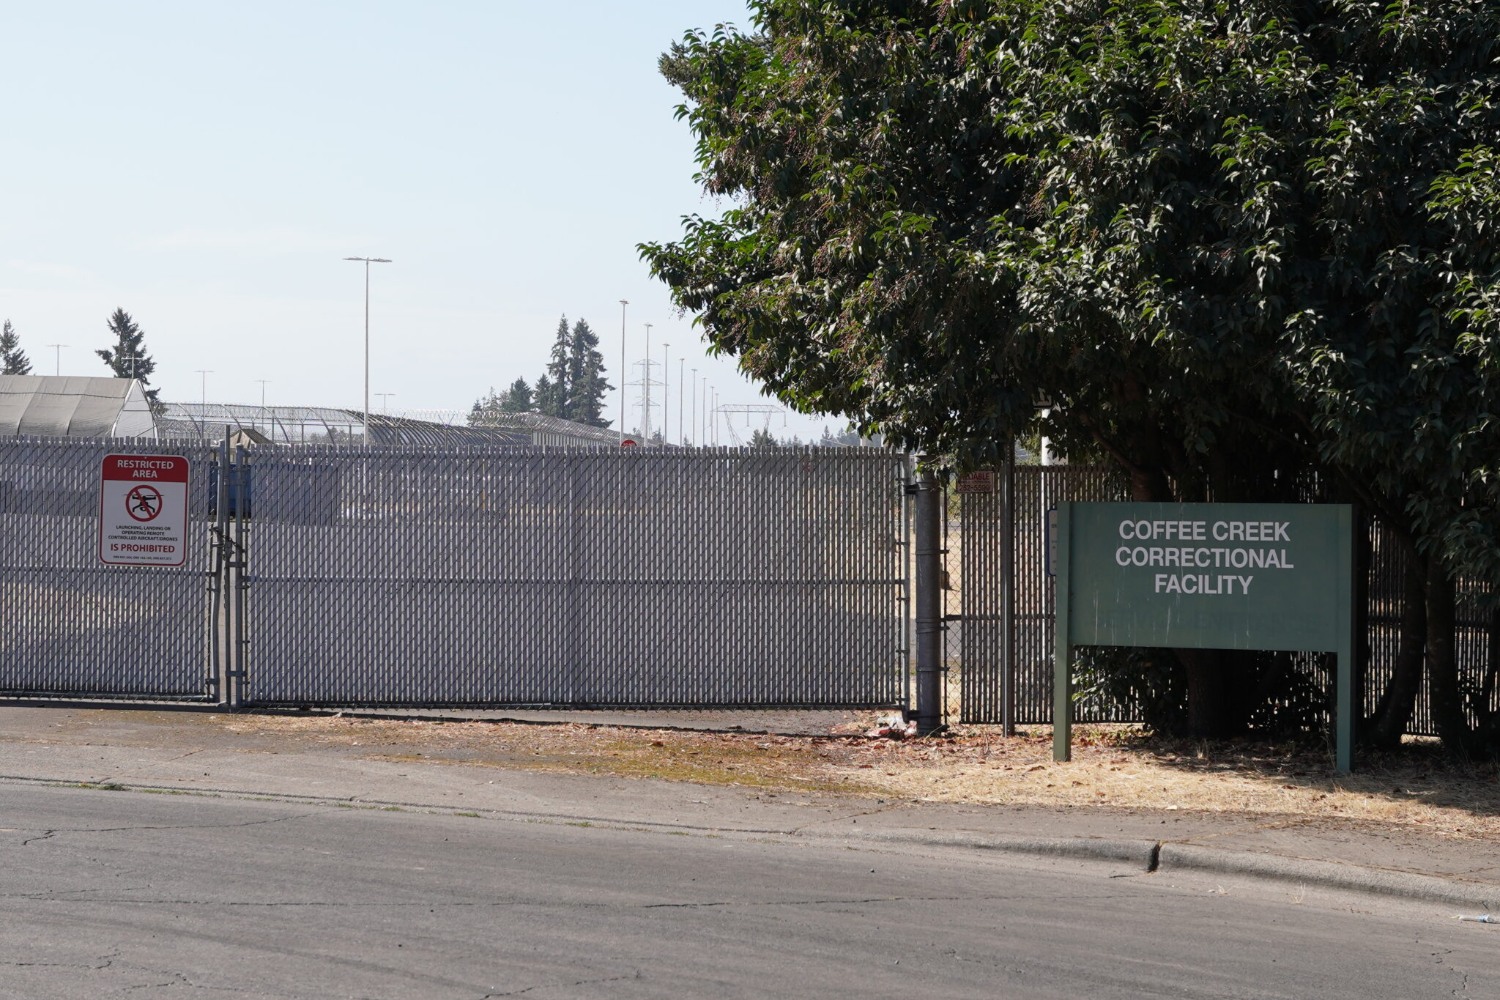 Recent court case sheds light on ‘punitive, para-military atmosphere’ at women’s prison